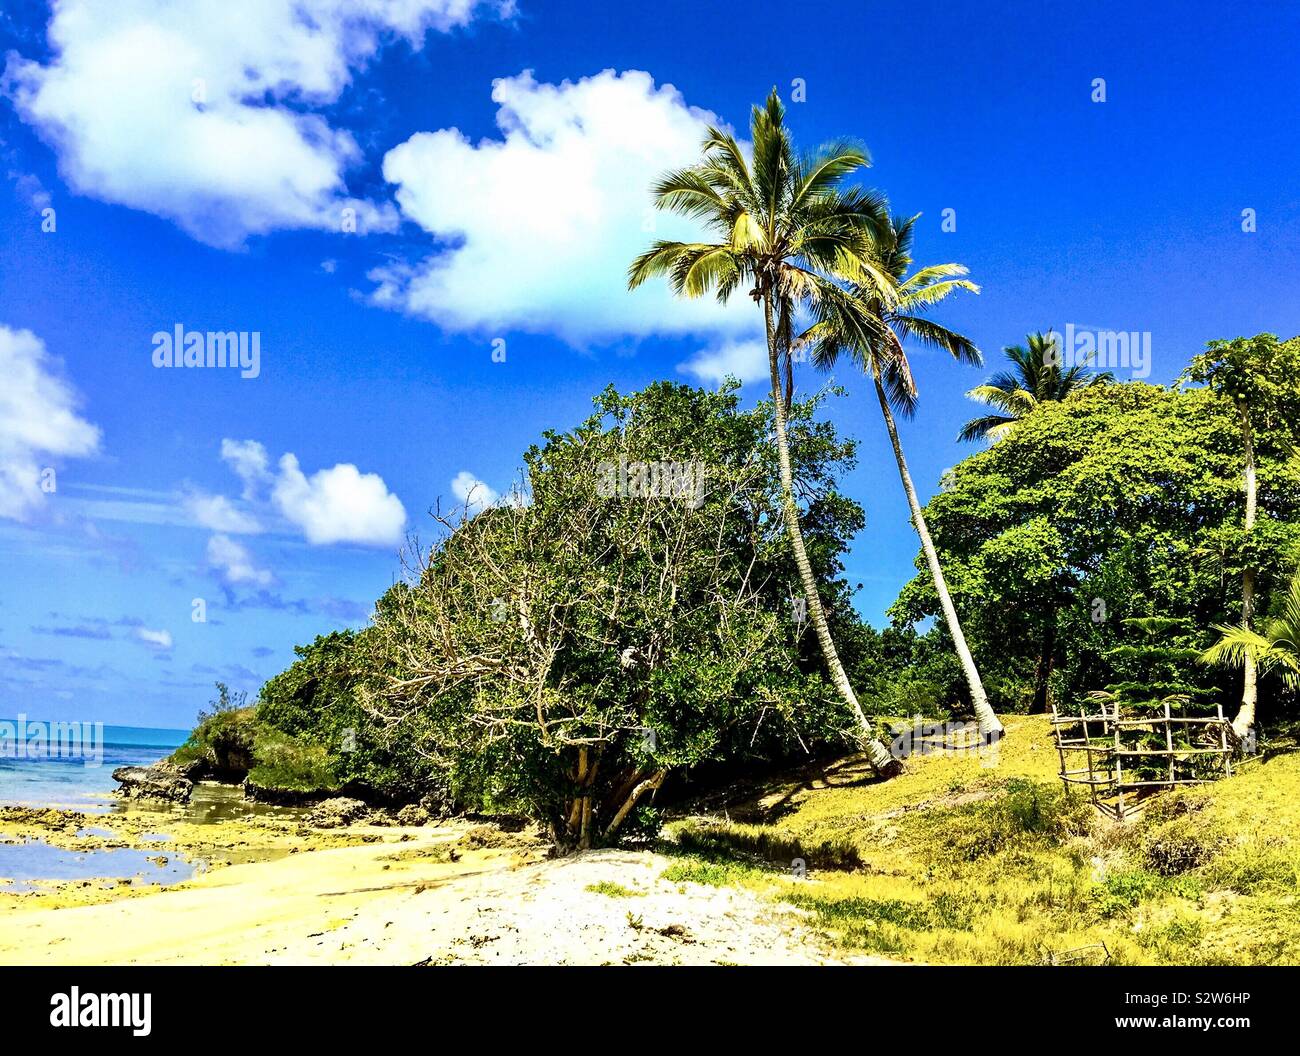 The Isle of Pines is a French territory in the South Pacific. The island is known for its tall pine trees and white sand beaches. Stock Photo